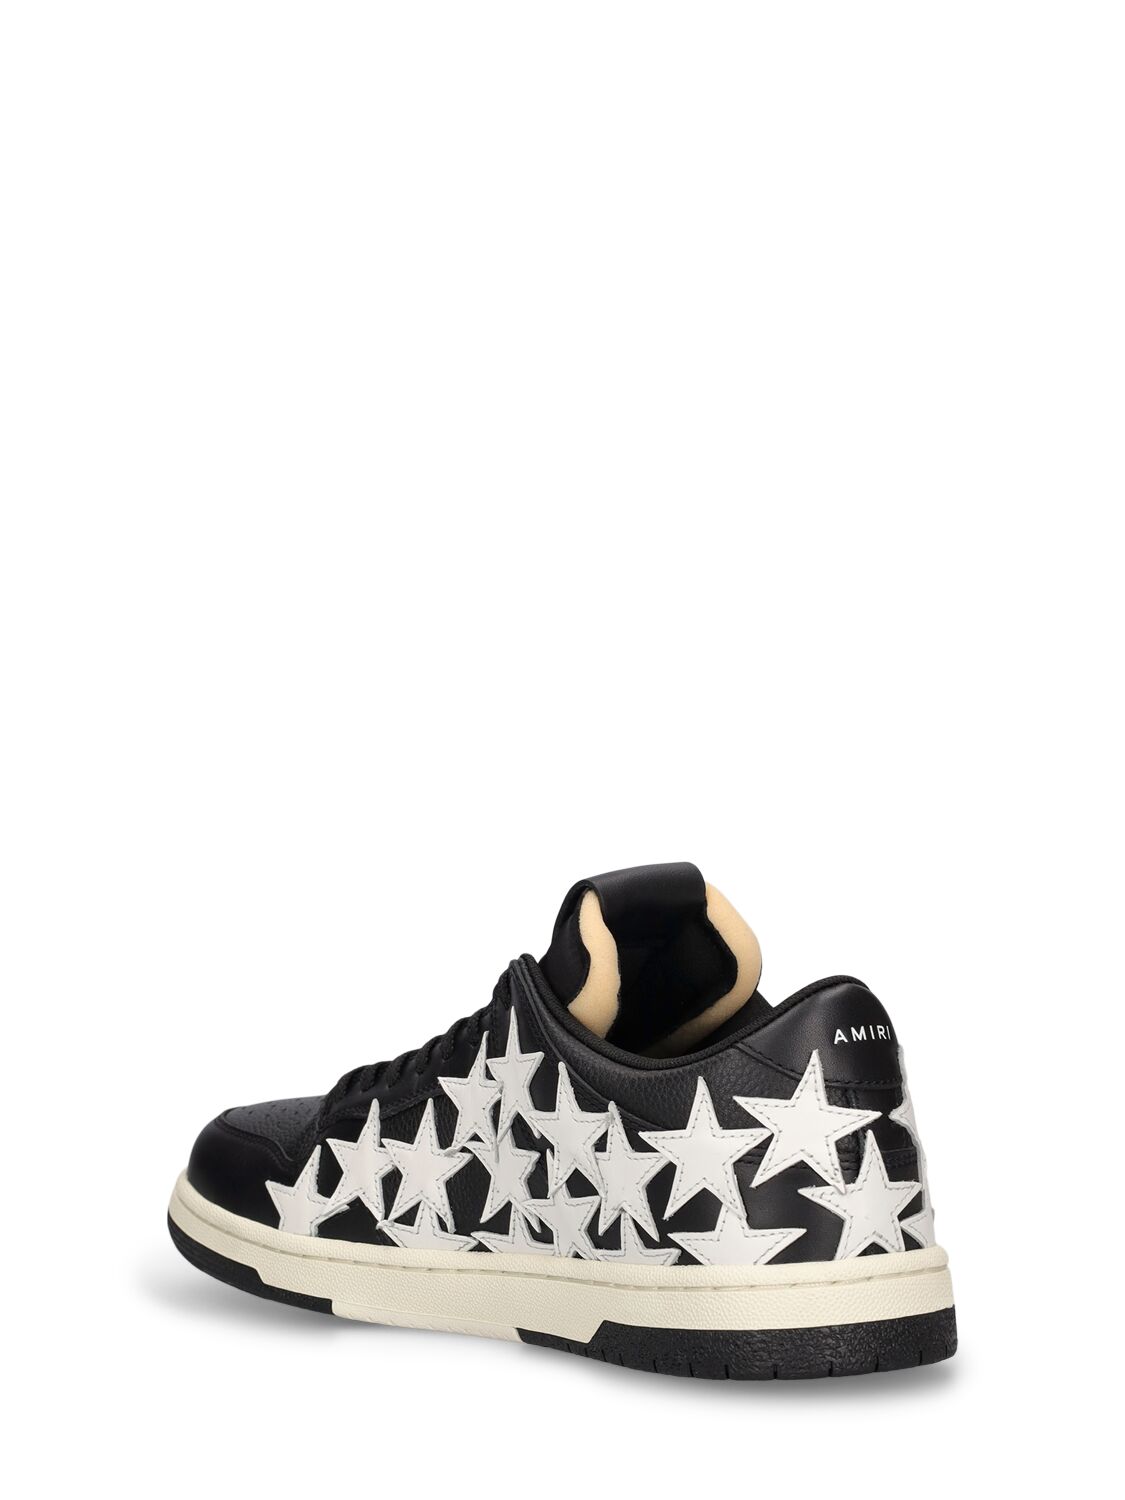 Shop Amiri Stars Cashmere Low Top Sneakers In Black,white